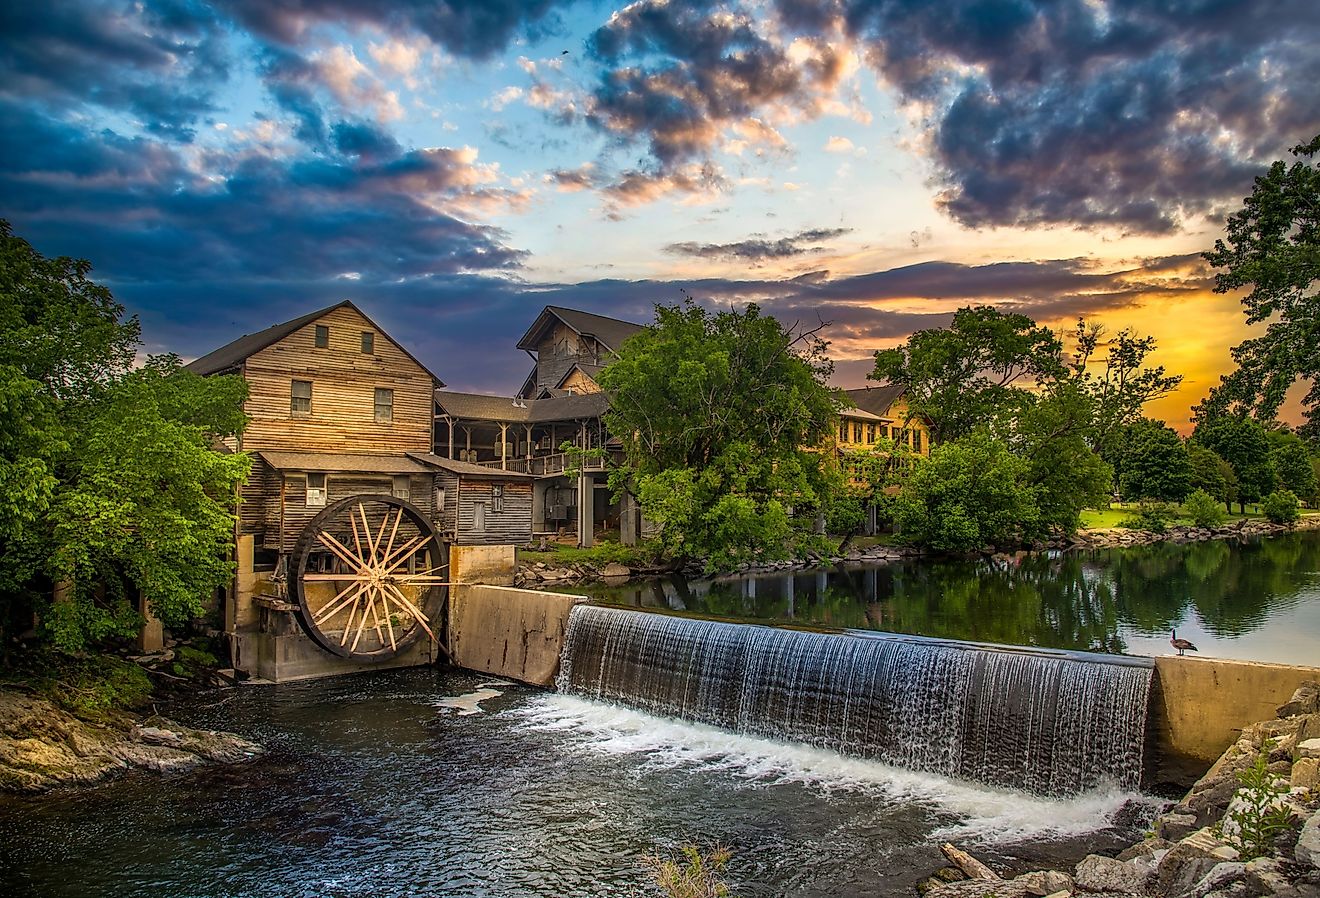 The old mill in Gatlinburg, Tennessee and a duck on the surface of the water.